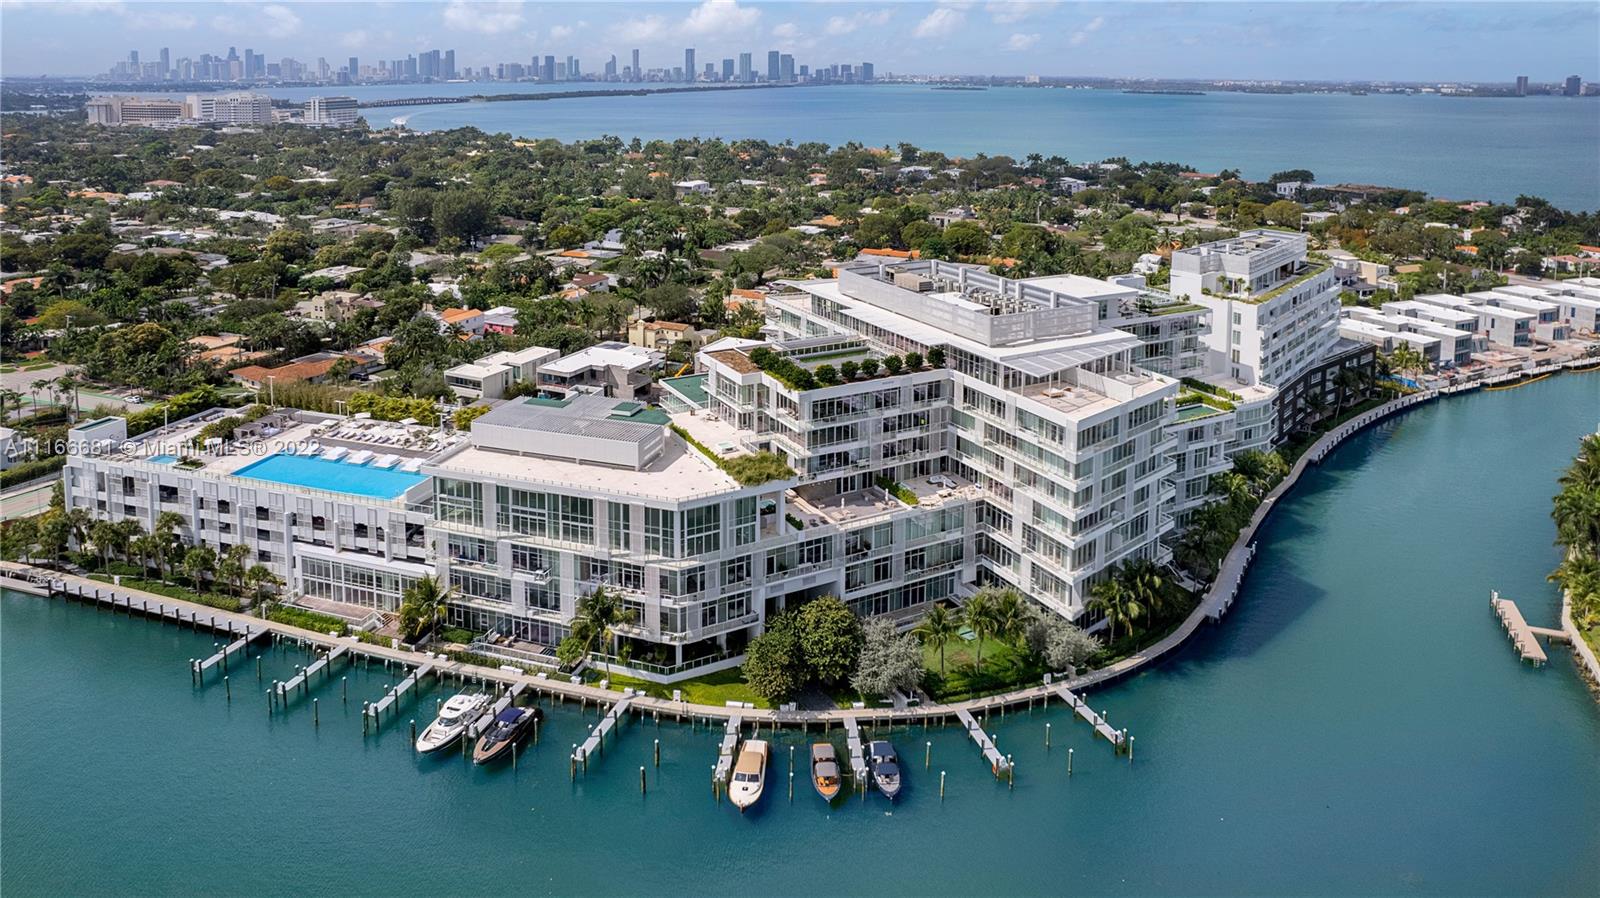 A quiet, lakeside community, waterfront gardens, rooftop pool, and 36 boat slips.  This 4255 Square foot, 4 bed 4.5 bath was built for entertaining. With an expansive open floorplan. Enter the home through your private elevator foyer. Owners are greeted with a grand kitchen that serves as the home’s hearth. Pierro Lissoni designed Boffi Kitchen with Expansive stone countertops Gaggenau Appliance Suite including: freezer, gas cooktop, microwave oven, stainless-steel wall oven, full-size dishwasher and built-in coffee maker Zucchetti plumbing fixtures, master suite w/ Designer Boffi bathrooms by Lissoni with Zucchetti fixtures accented with Stone floors and walls. The rest you have to see. A dedicated staff and elite concierge are at the heart of this community. RARELY AVAILABLE!